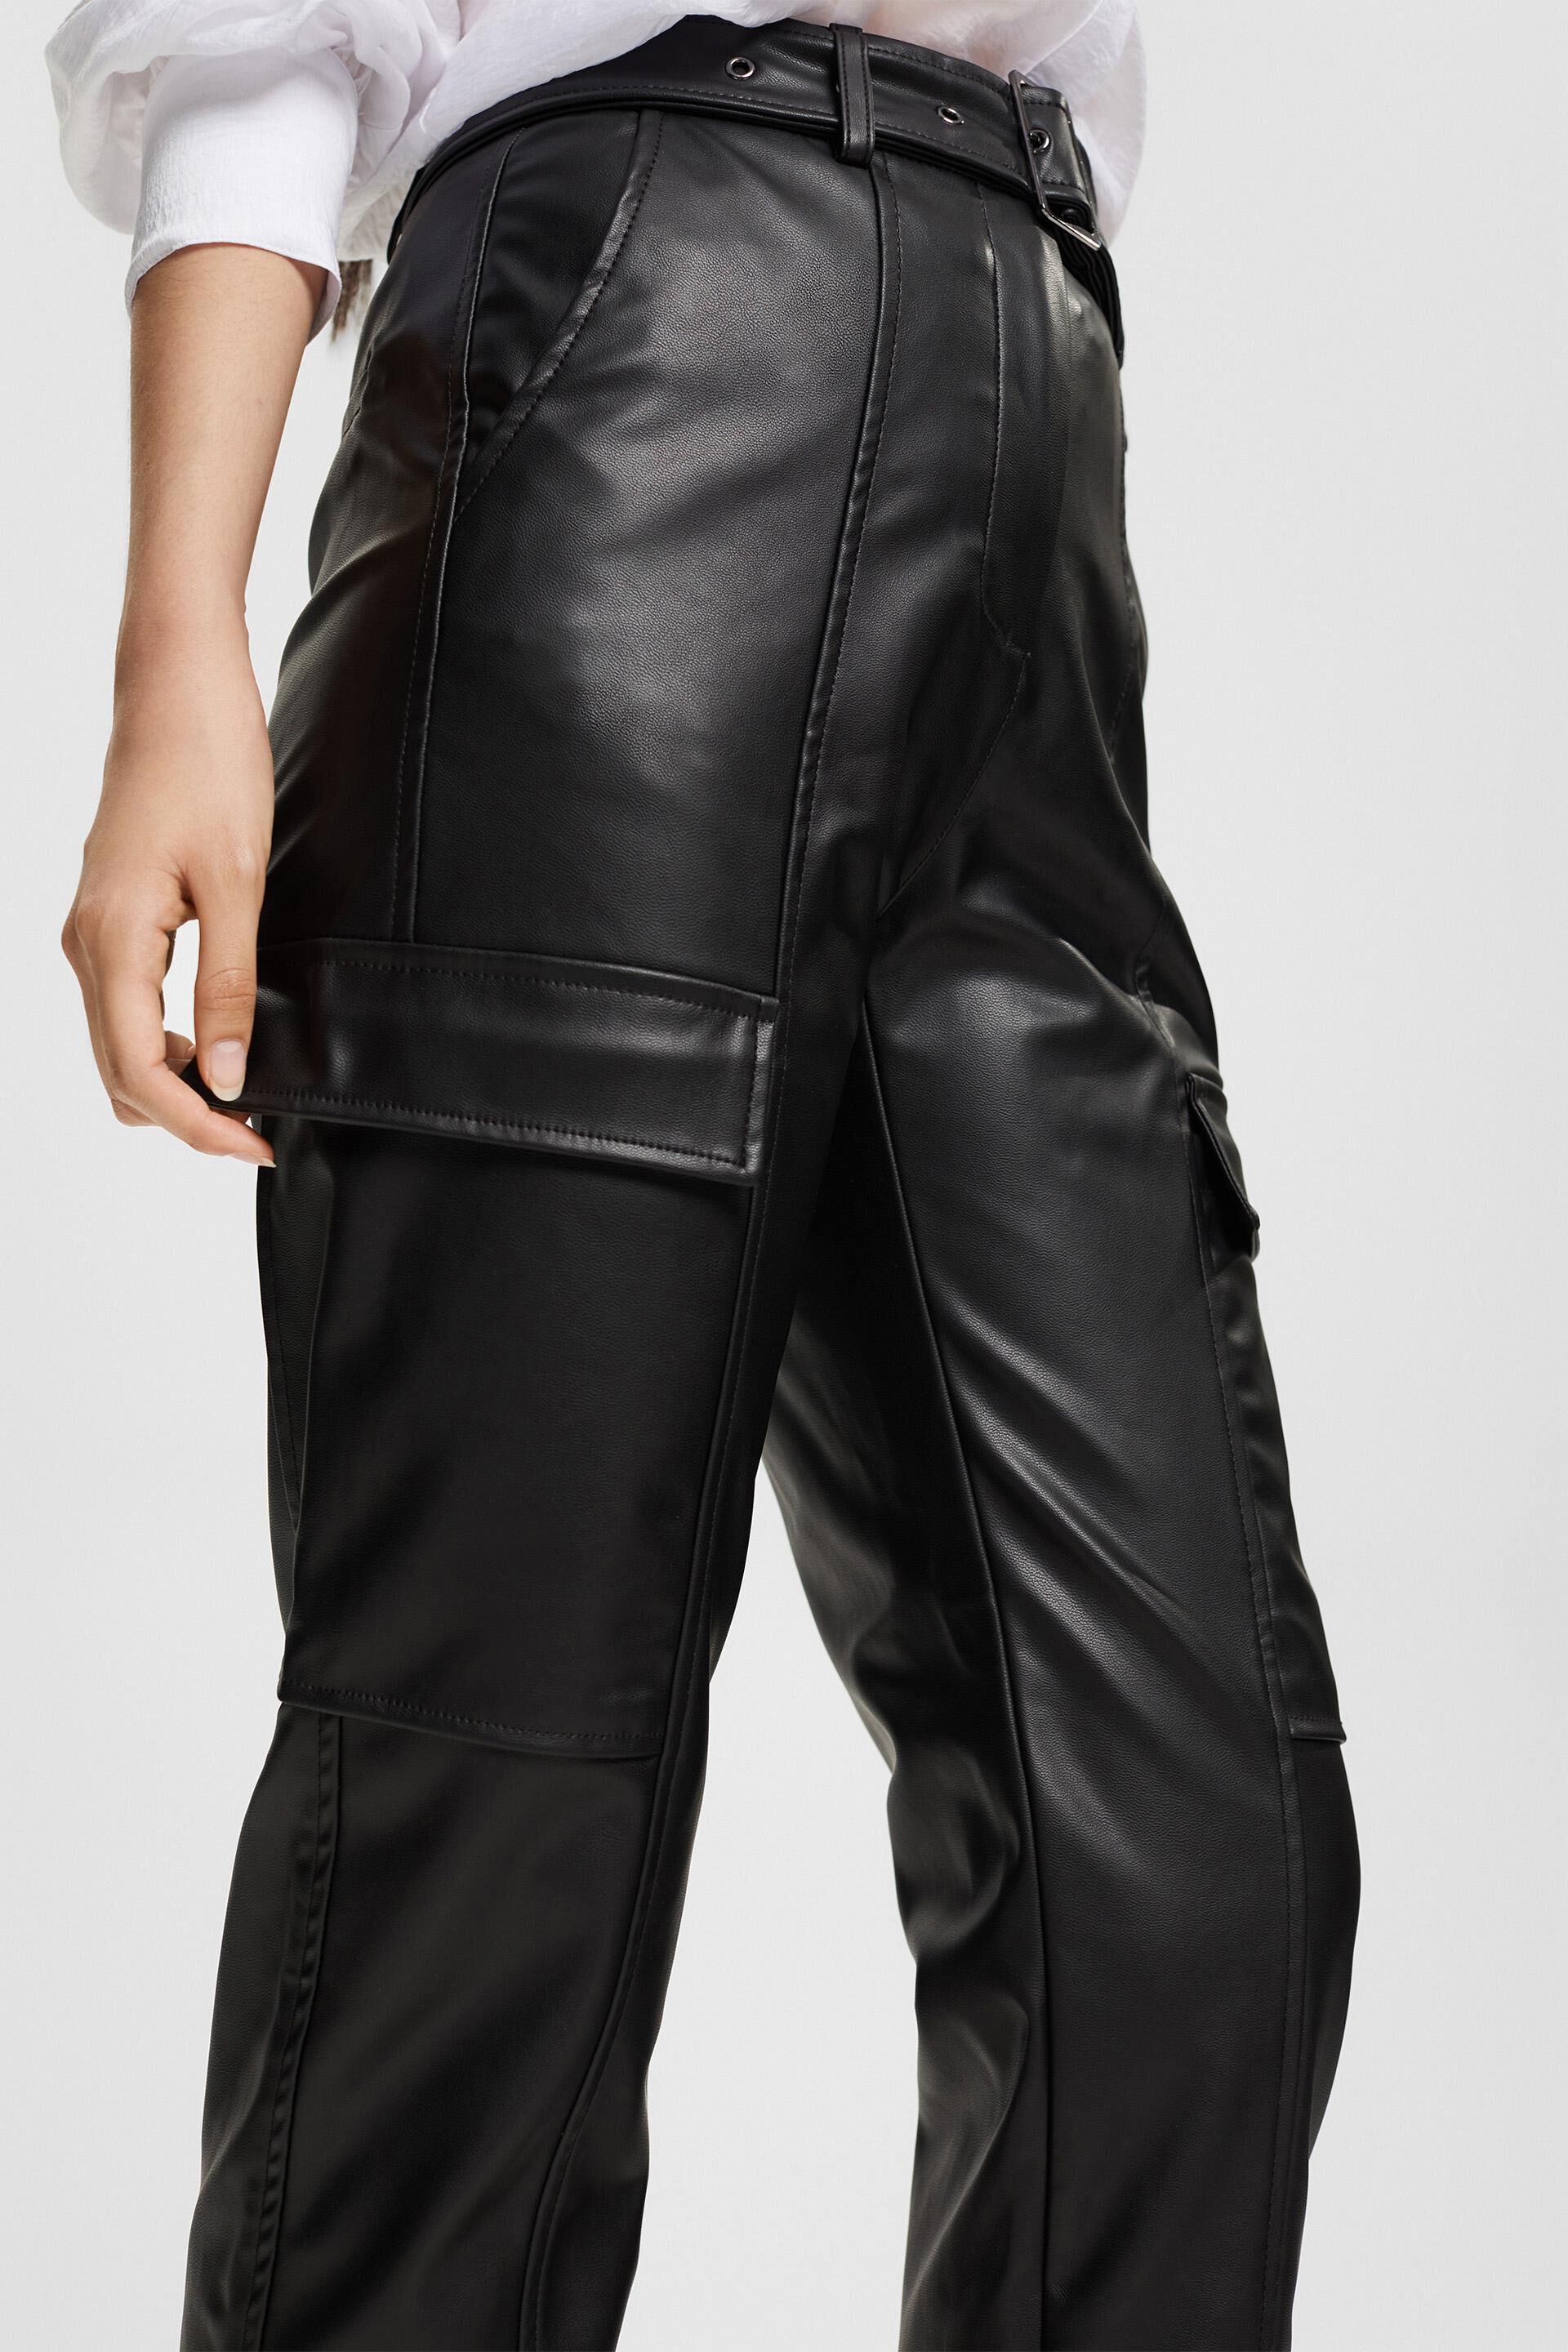 Buy Women's Partywear High Waisted Leather Regular Trousers Online | Next UK